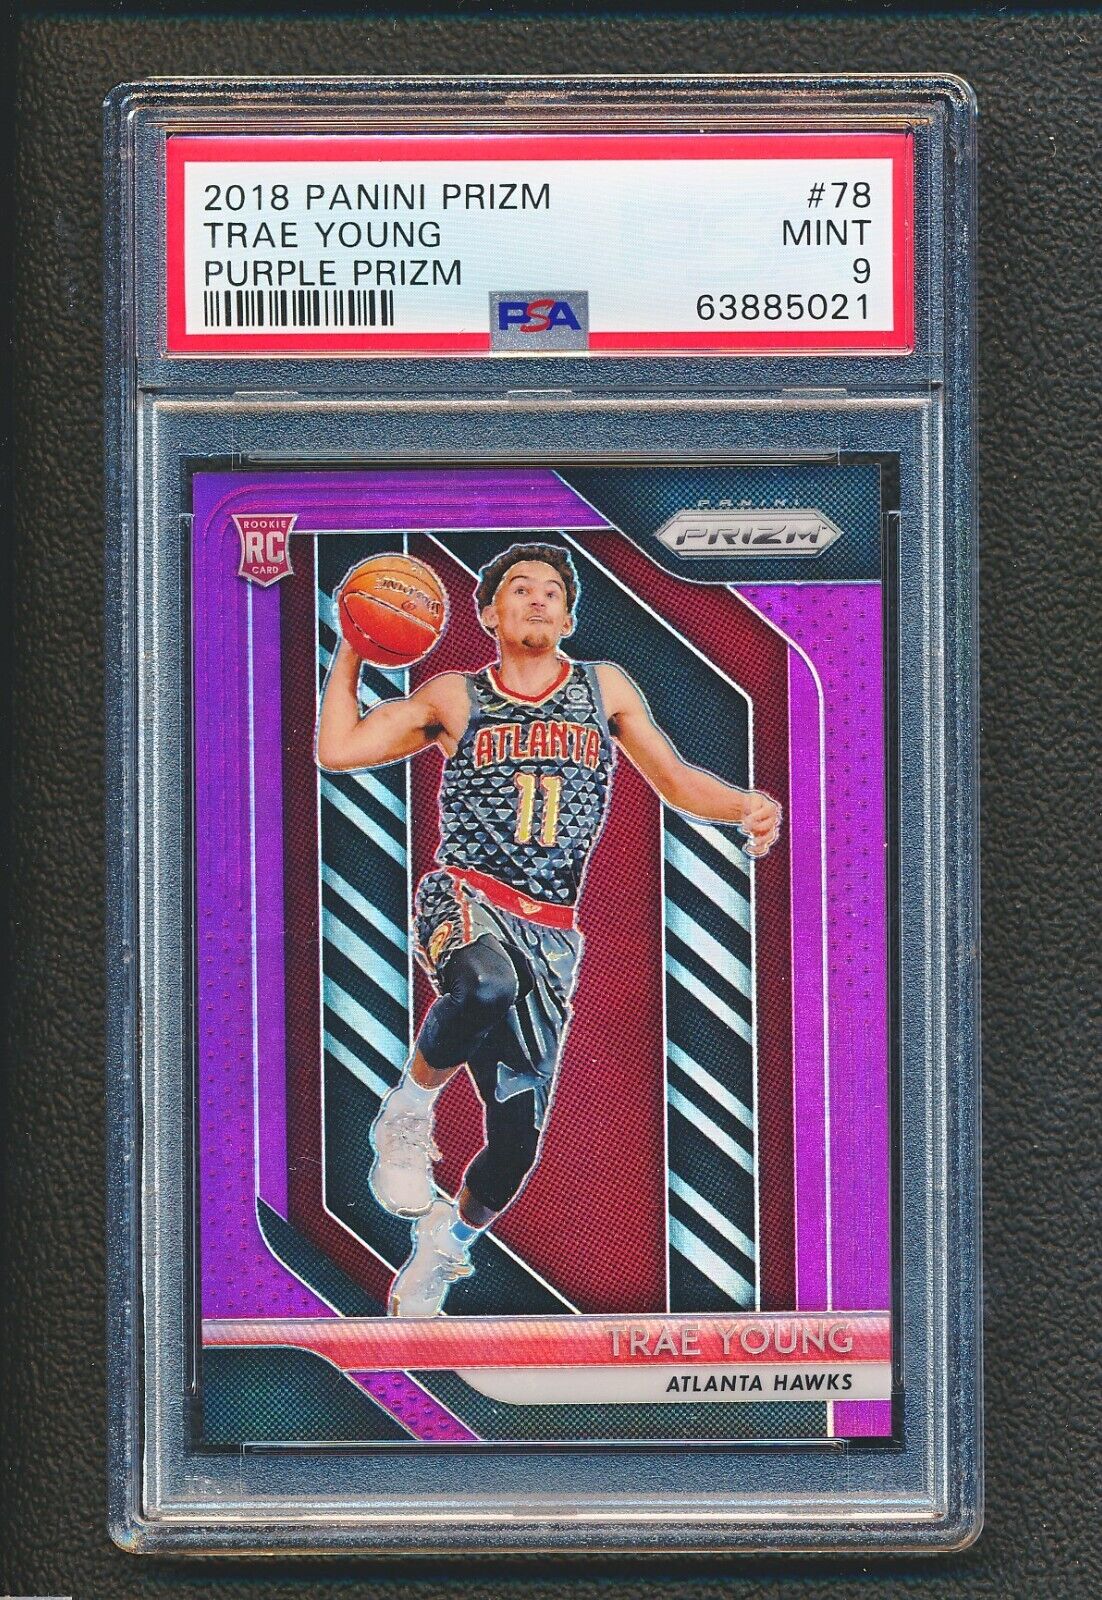 2018-19 Prizm #78 Trae Young Rookie Purple RC 75/75 PSA 9 (Newton's Ring) 1C